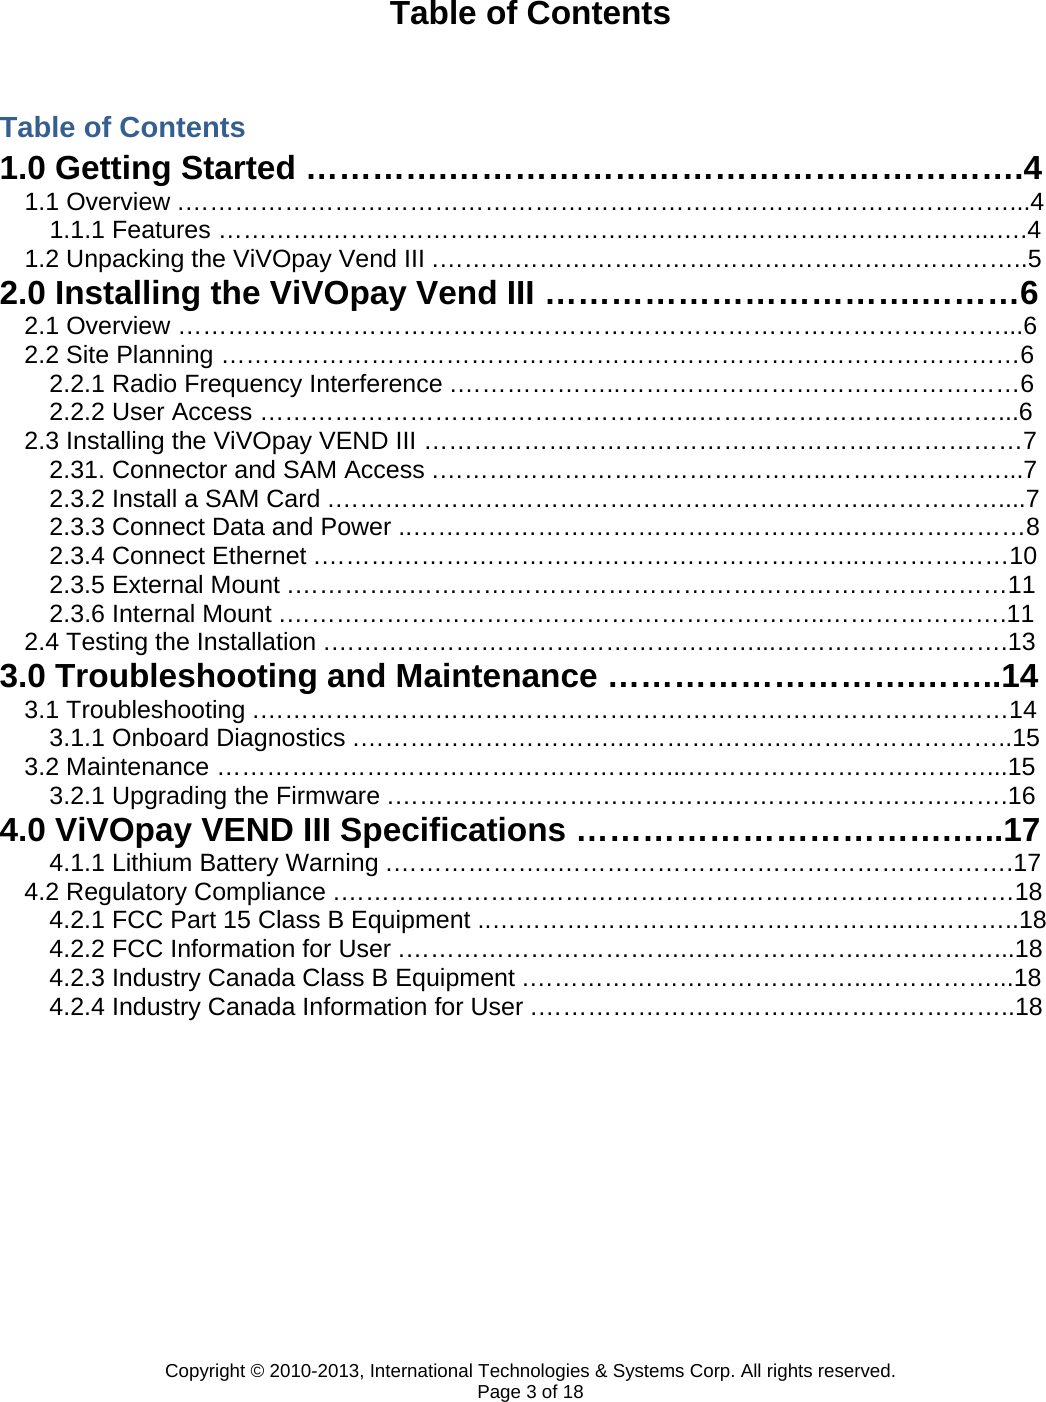 Copyright © 2010-2013, International Technologies &amp; Systems Corp. All rights reserved. Page 3 of 18 Table of Contents  Table of Contents 1.0 Getting Started ………….…………………………………………….4 1.1 Overview .………………………………………………………………………………………...4 1.1.1 Features ………….……………………………………………………………………...….4 1.2 Unpacking the ViVOpay Vend III .……………………………………………………………..5 2.0 Installing the ViVOpay Vend III …………………………….………6 2.1 Overview ………………………………………………………………………………………...6 2.2 Site Planning ……………………………………………………………………………………6 2.2.1 Radio Frequency Interference .………………..…………………………………………6 2.2.2 User Access ……………………………………………..………………………………...6 2.3 Installing the ViVOpay VEND III ………………………………………………………………7 2.31. Connector and SAM Access .………………………………………..…………………...7 2.3.2 Install a SAM Card .………………………………………………………..……………....7 2.3.3 Connect Data and Power ..…………………………………………….…….……………8 2.3.4 Connect Ethernet .………………………………………………………..………………10 2.3.5 External Mount .…………..………………………………………………………………11 2.3.6 Internal Mount .………………………………………………………..………………….11 2.4 Testing the Installation .……………………………………………...……………………….13 3.0 Troubleshooting and Maintenance ……………………….……..14 3.1 Troubleshooting .………………………………………………………………………………14 3.1.1 Onboard Diagnostics .………………………….……………….………………………..15 3.2 Maintenance ………………………………………………...………………………………...15 3.2.1 Upgrading the Firmware .………………………………….…………………………….16 4.0 ViVOpay VEND III Specifications …………………………….…..17 4.1.1 Lithium Battery Warning .………………..……………………………………………….17 4.2 Regulatory Compliance .………………………………………………………………………18 4.2.1 FCC Part 15 Class B Equipment ..…………………………………………..…………..18 4.2.2 FCC Information for User .…………………………….………………….……………...18 4.2.3 Industry Canada Class B Equipment .…………………………………..……………...18 4.2.4 Industry Canada Information for User .……………………………..…………………..18           